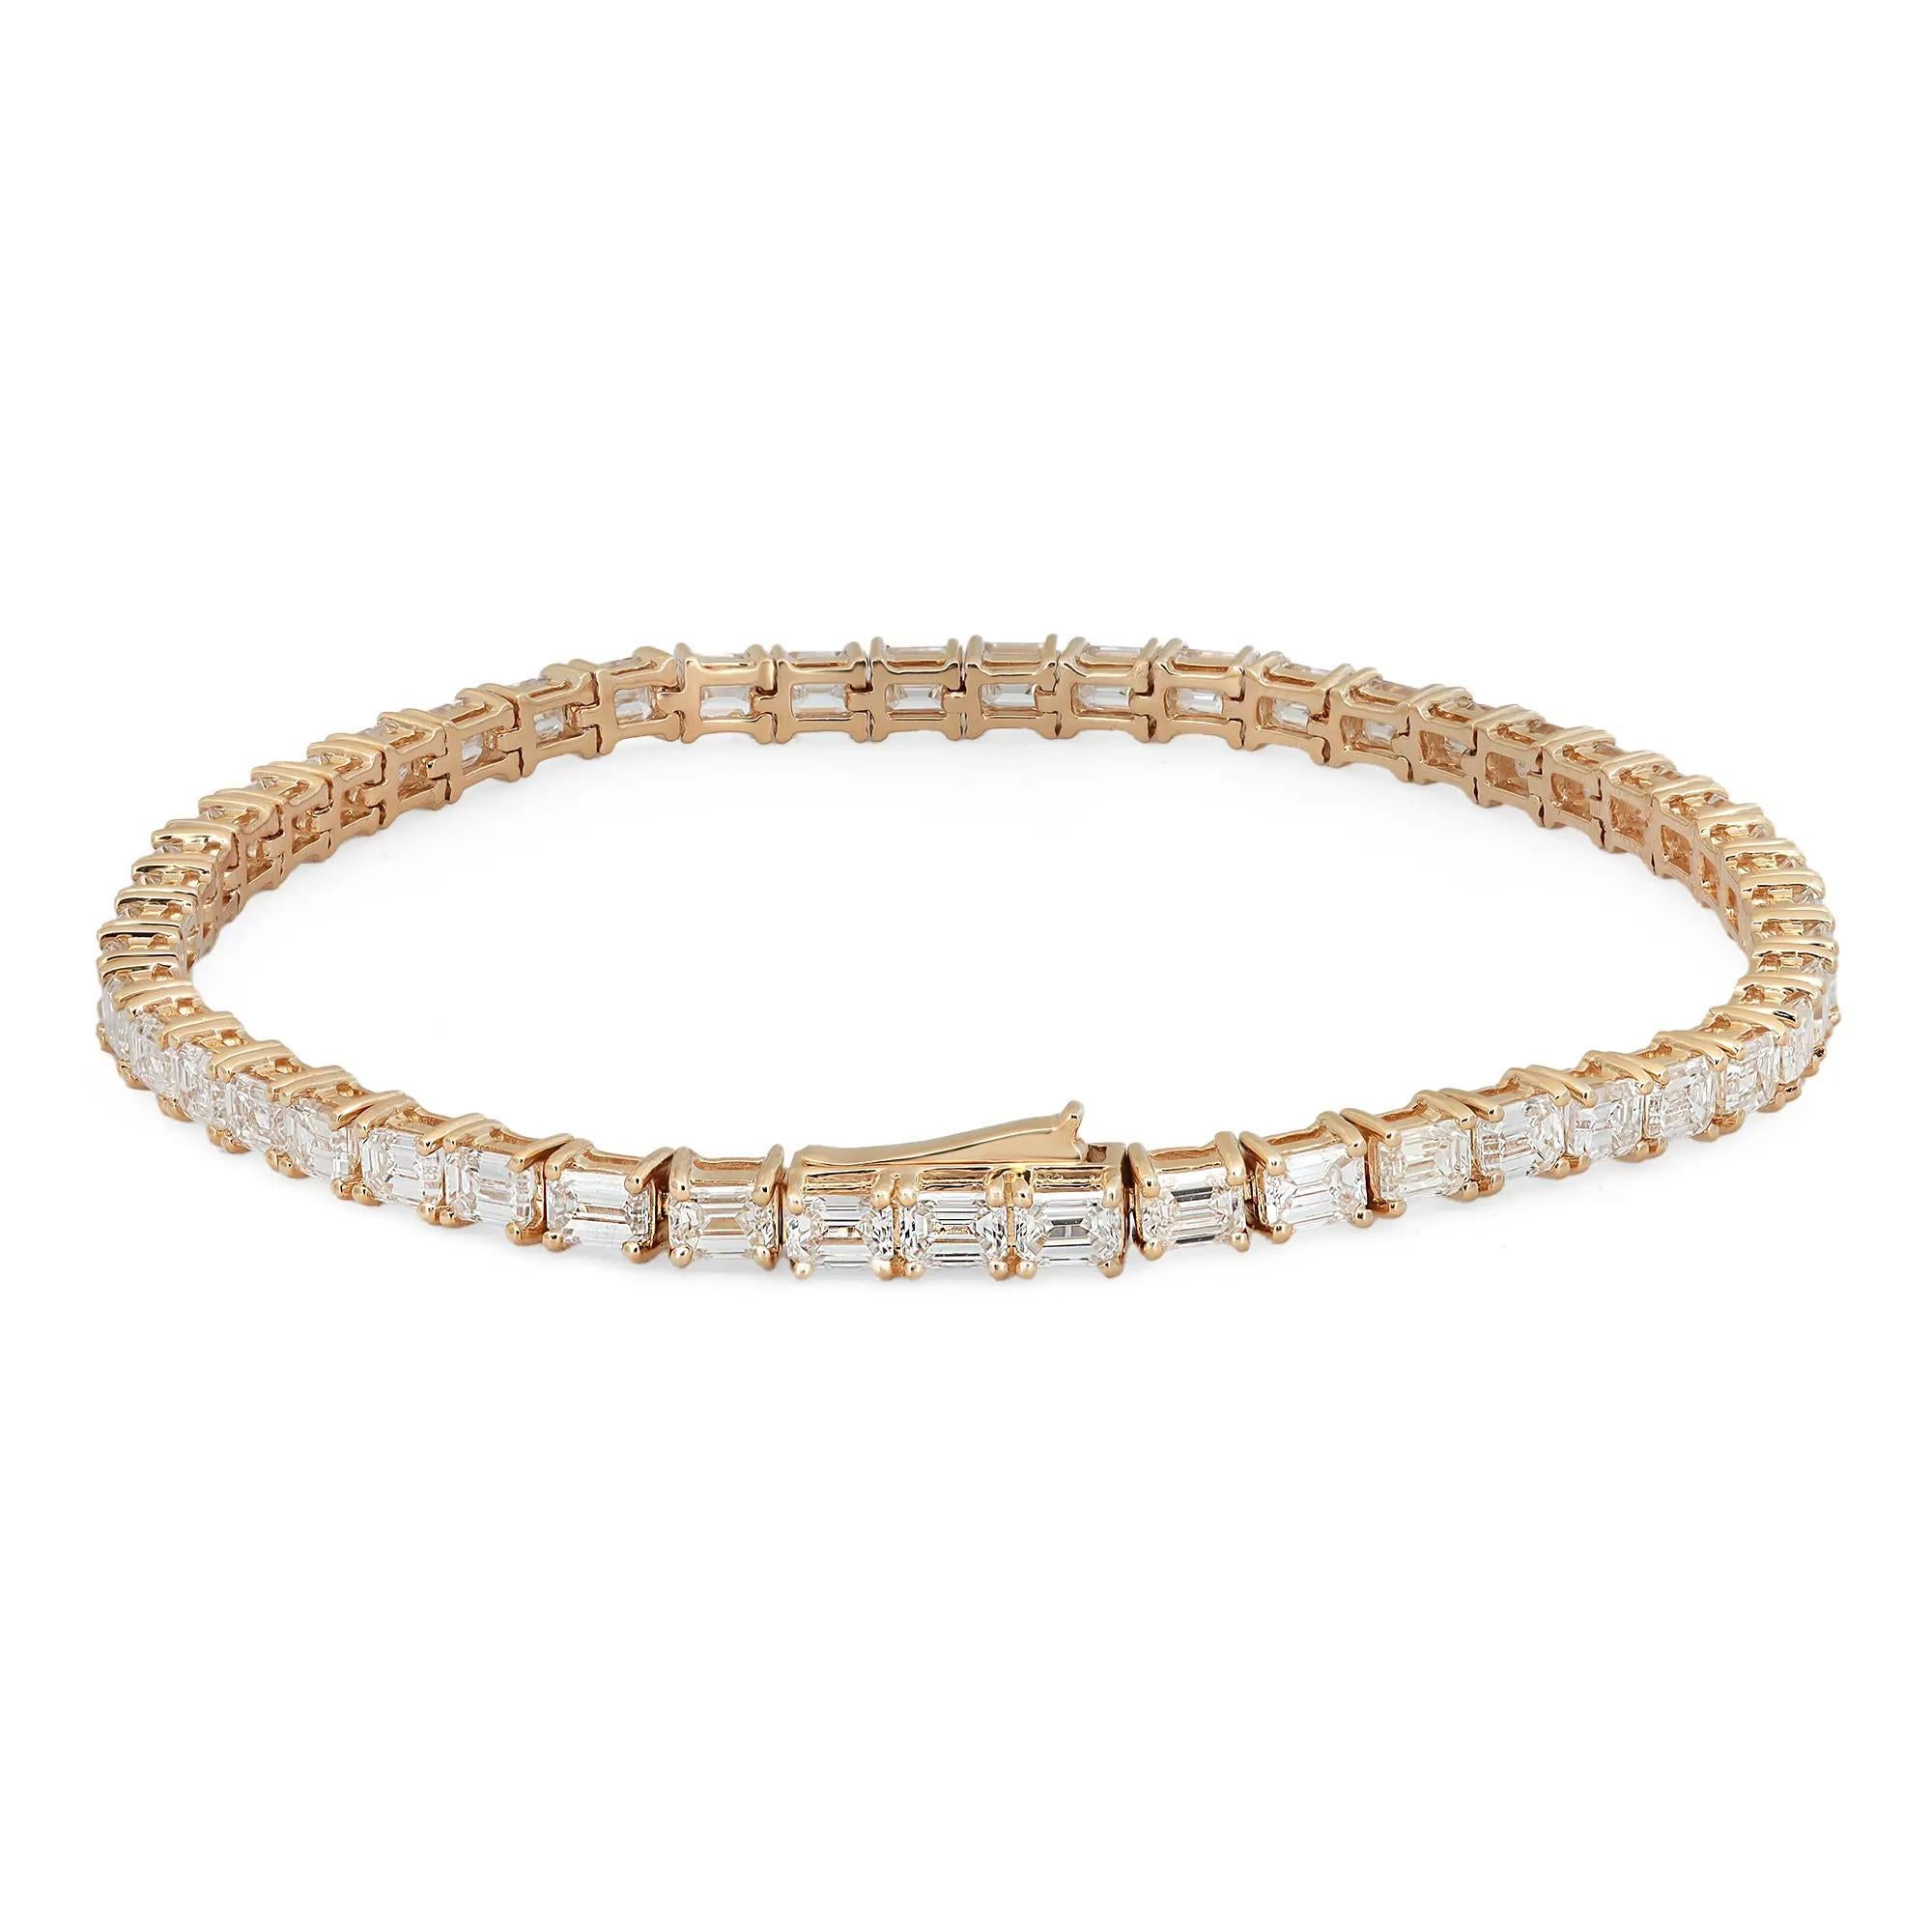 Introducing our stunning 7.00 Carat Emerald Cut Diamond East-West Tennis Bracelet, a bold and captivating piece of timeless luxury crafted in radiant 18K yellow gold. The centerpiece of this bracelet features a series of emerald-cut diamonds,